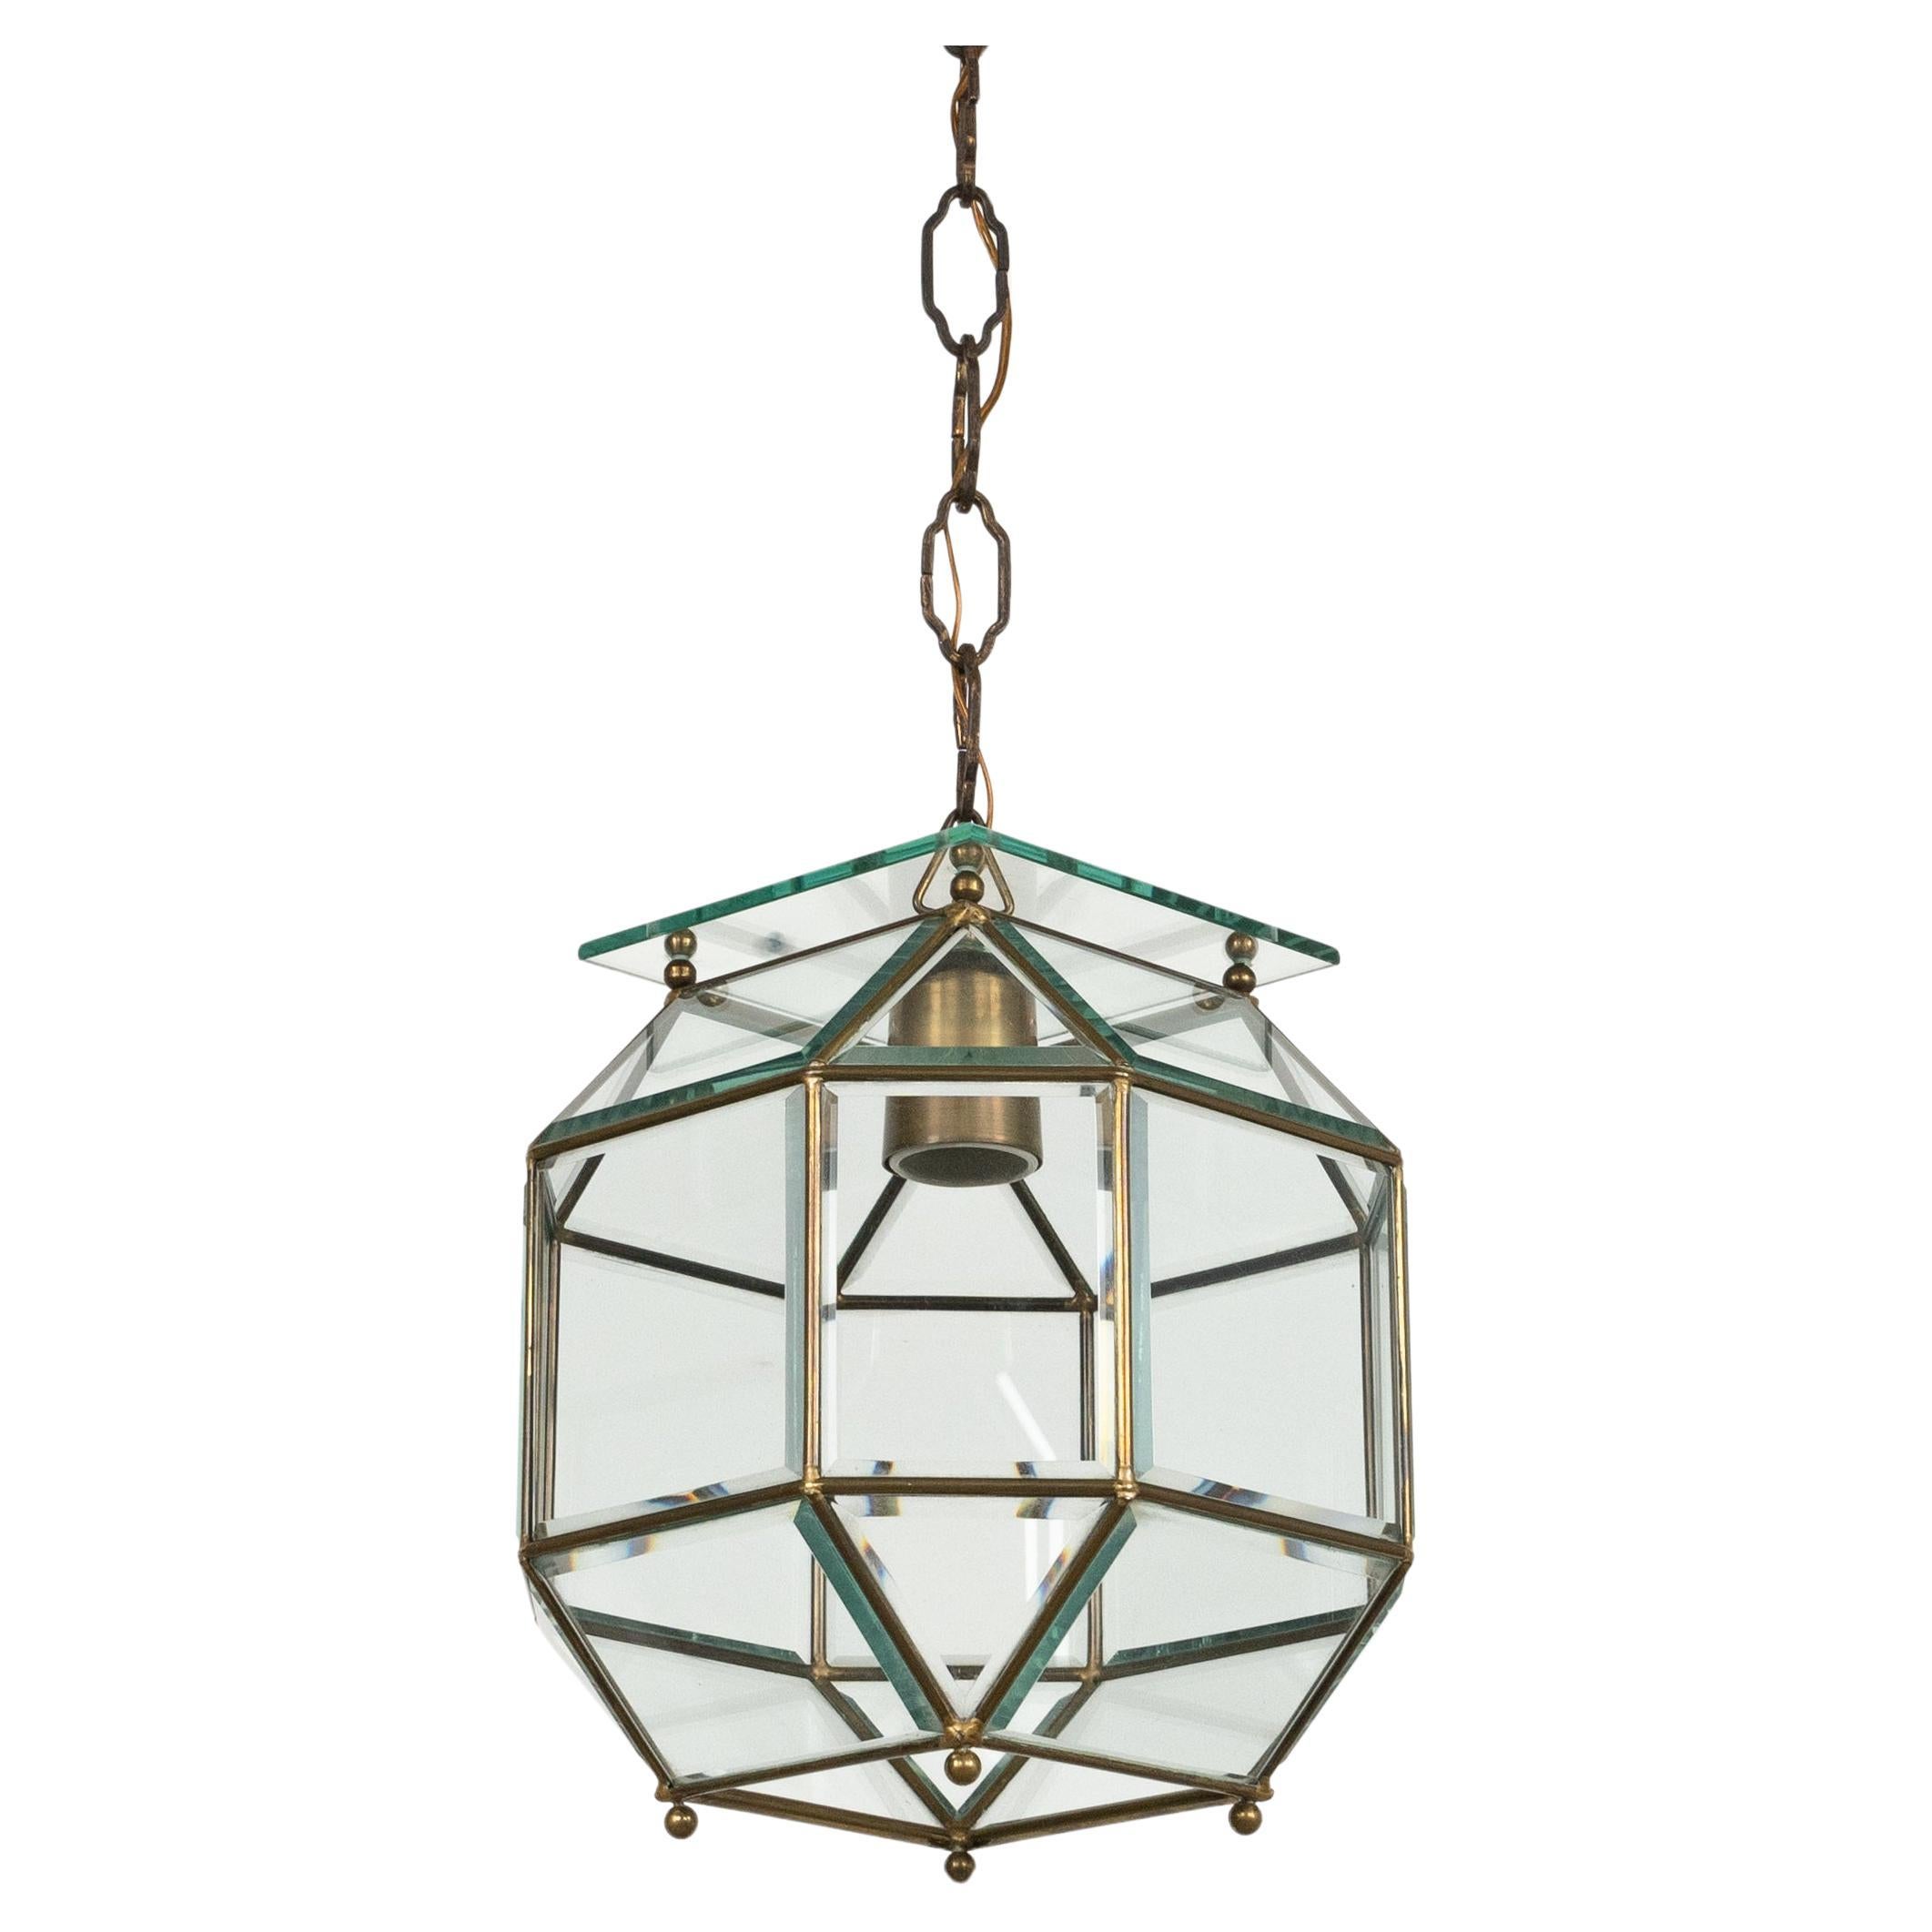 Midcentury amazing chandelier lantern in brass and beveled glass in the style of Adolf Loos.

Made in Italy in the 1950s.

The stunning and clear cut pendant shows twenty-four facetted clear glasses in a brass frame. 

Measures: 
Height with chain